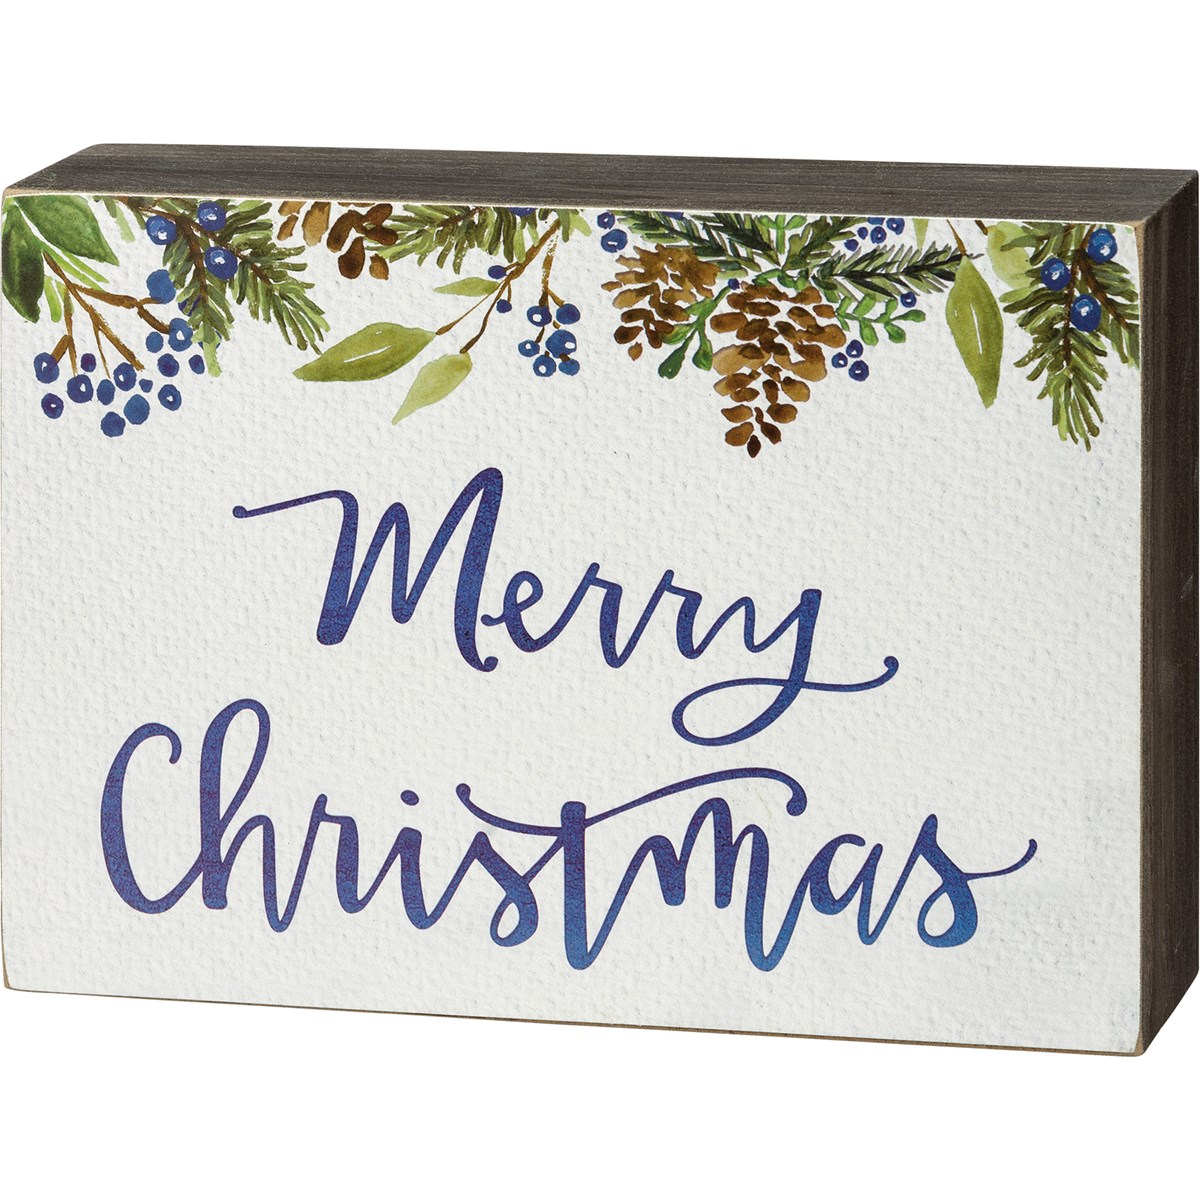 Merry Christmas Box Sign - Wood, Paper